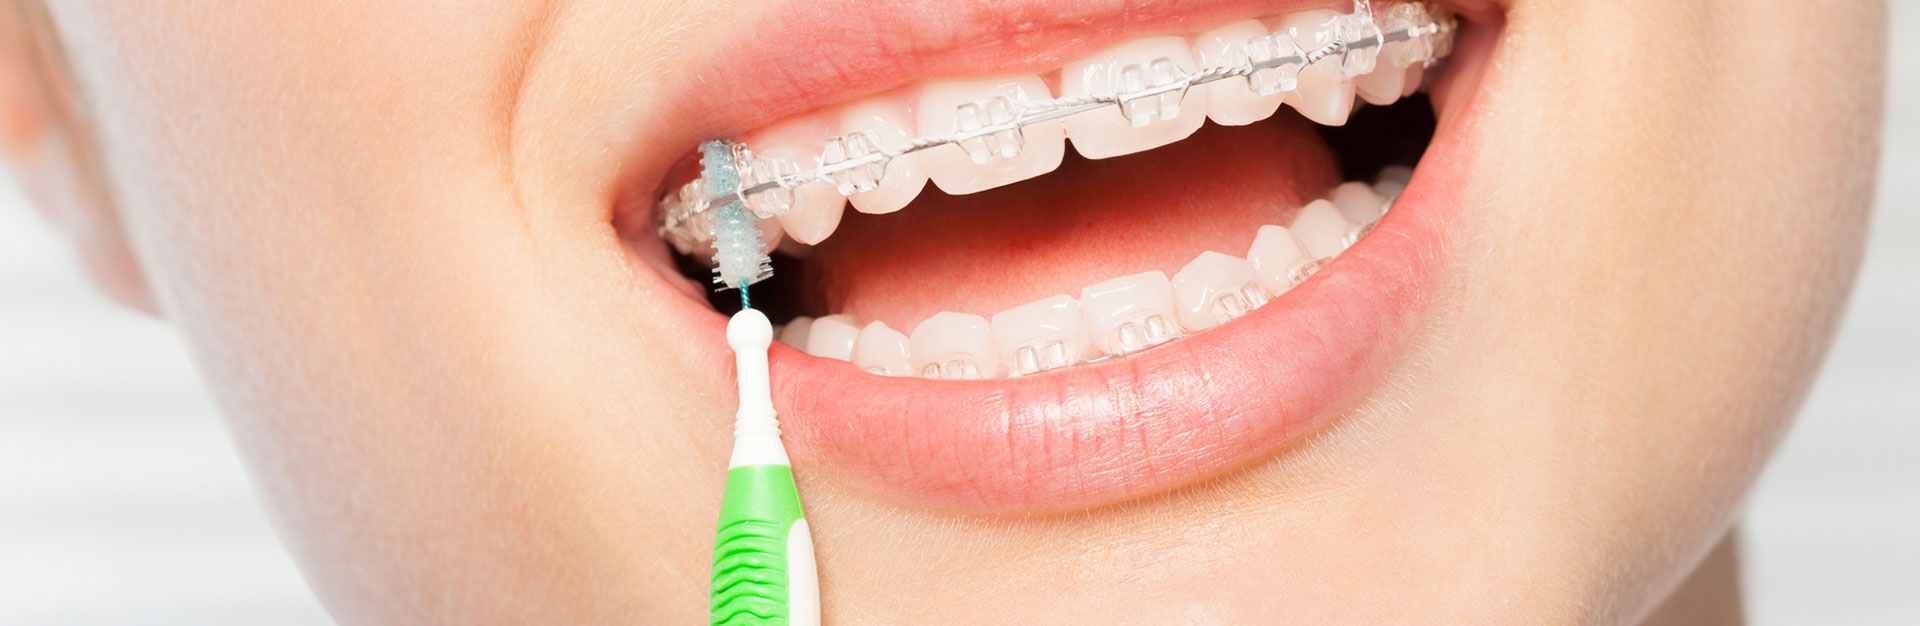 A woman is using clear braces